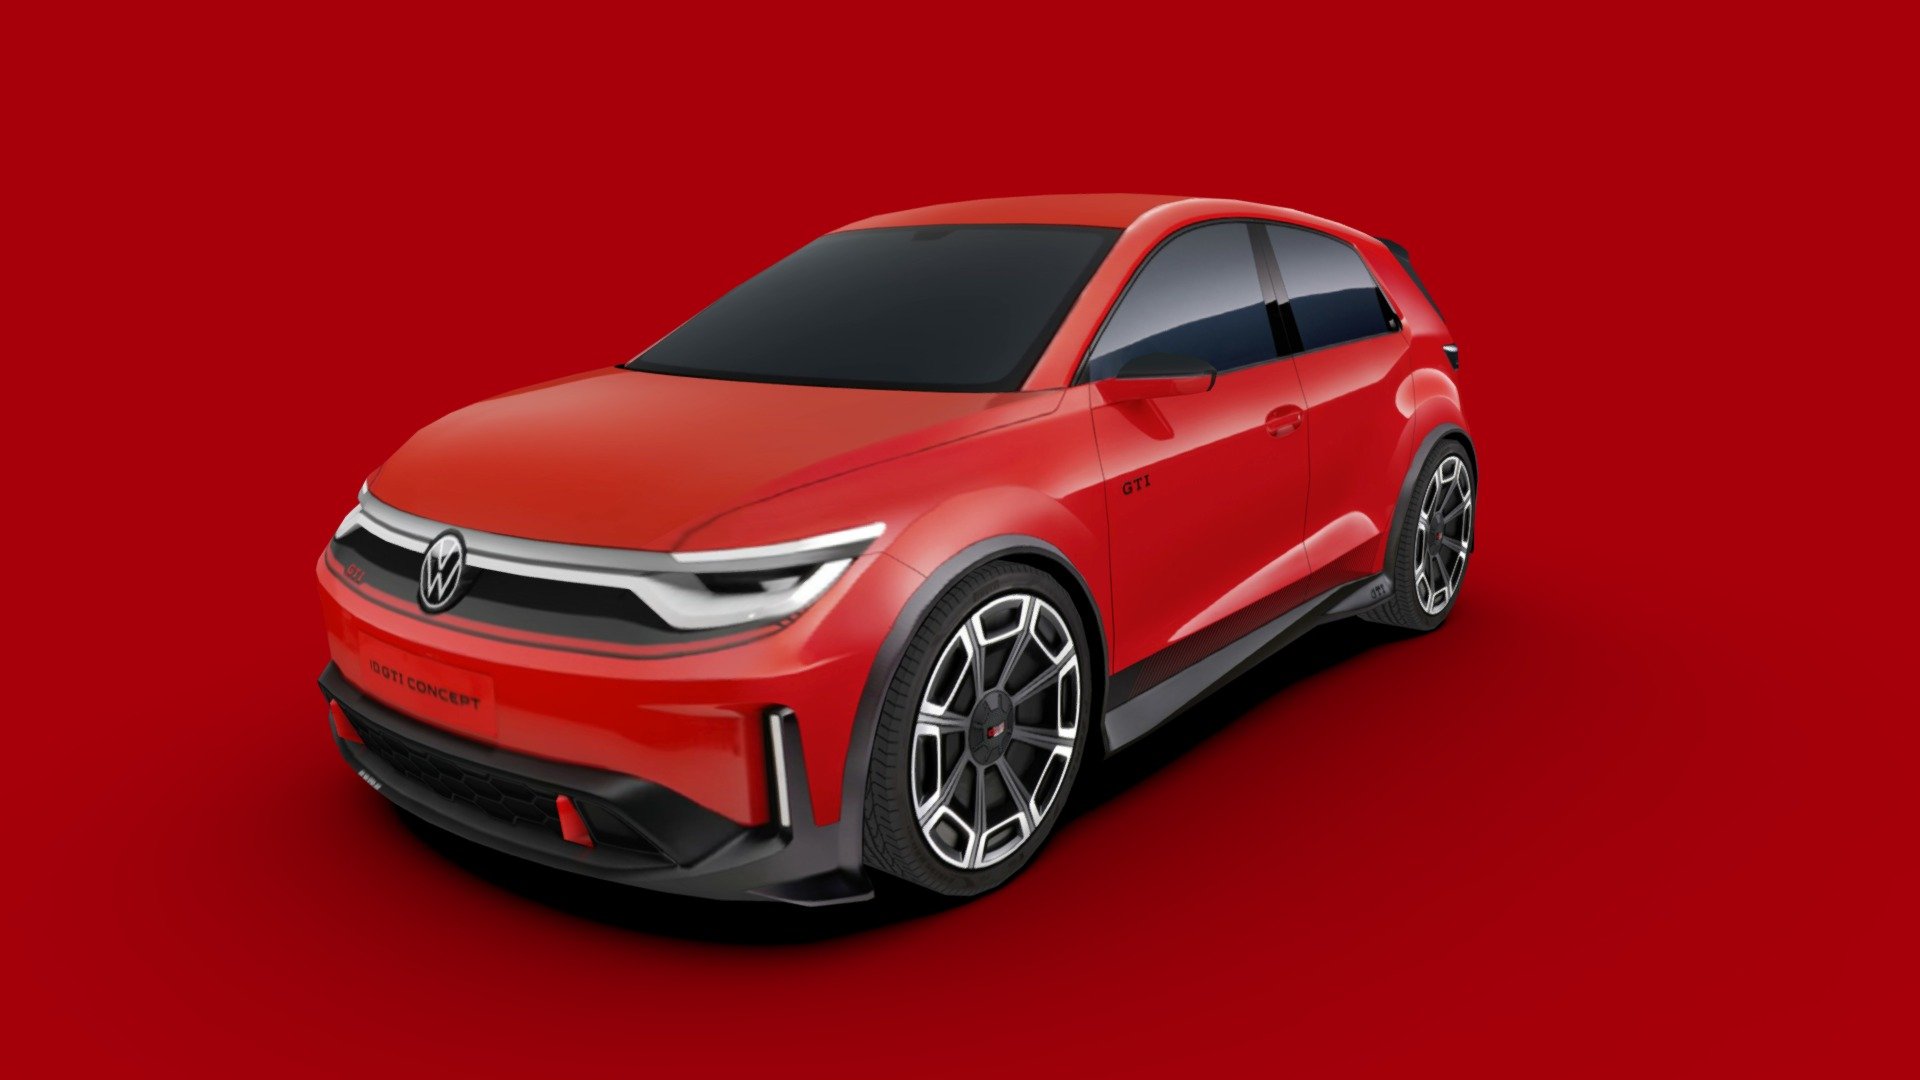 3d model of the 2024 Volkswagen ID. GTI concept, an all-electric compact 5-door hatchback.

The model is very low-poly, full-scale, real photos texture (single 2048 x 2048 png).

Package includes 5 file formats and texture (3ds, fbx, dae, obj and skp)

Hope you enjoy it.

José Bronze - Volkswagen ID. GTI 2024 - Buy Royalty Free 3D model by Jose Bronze (@pinceladas3d) 3d model